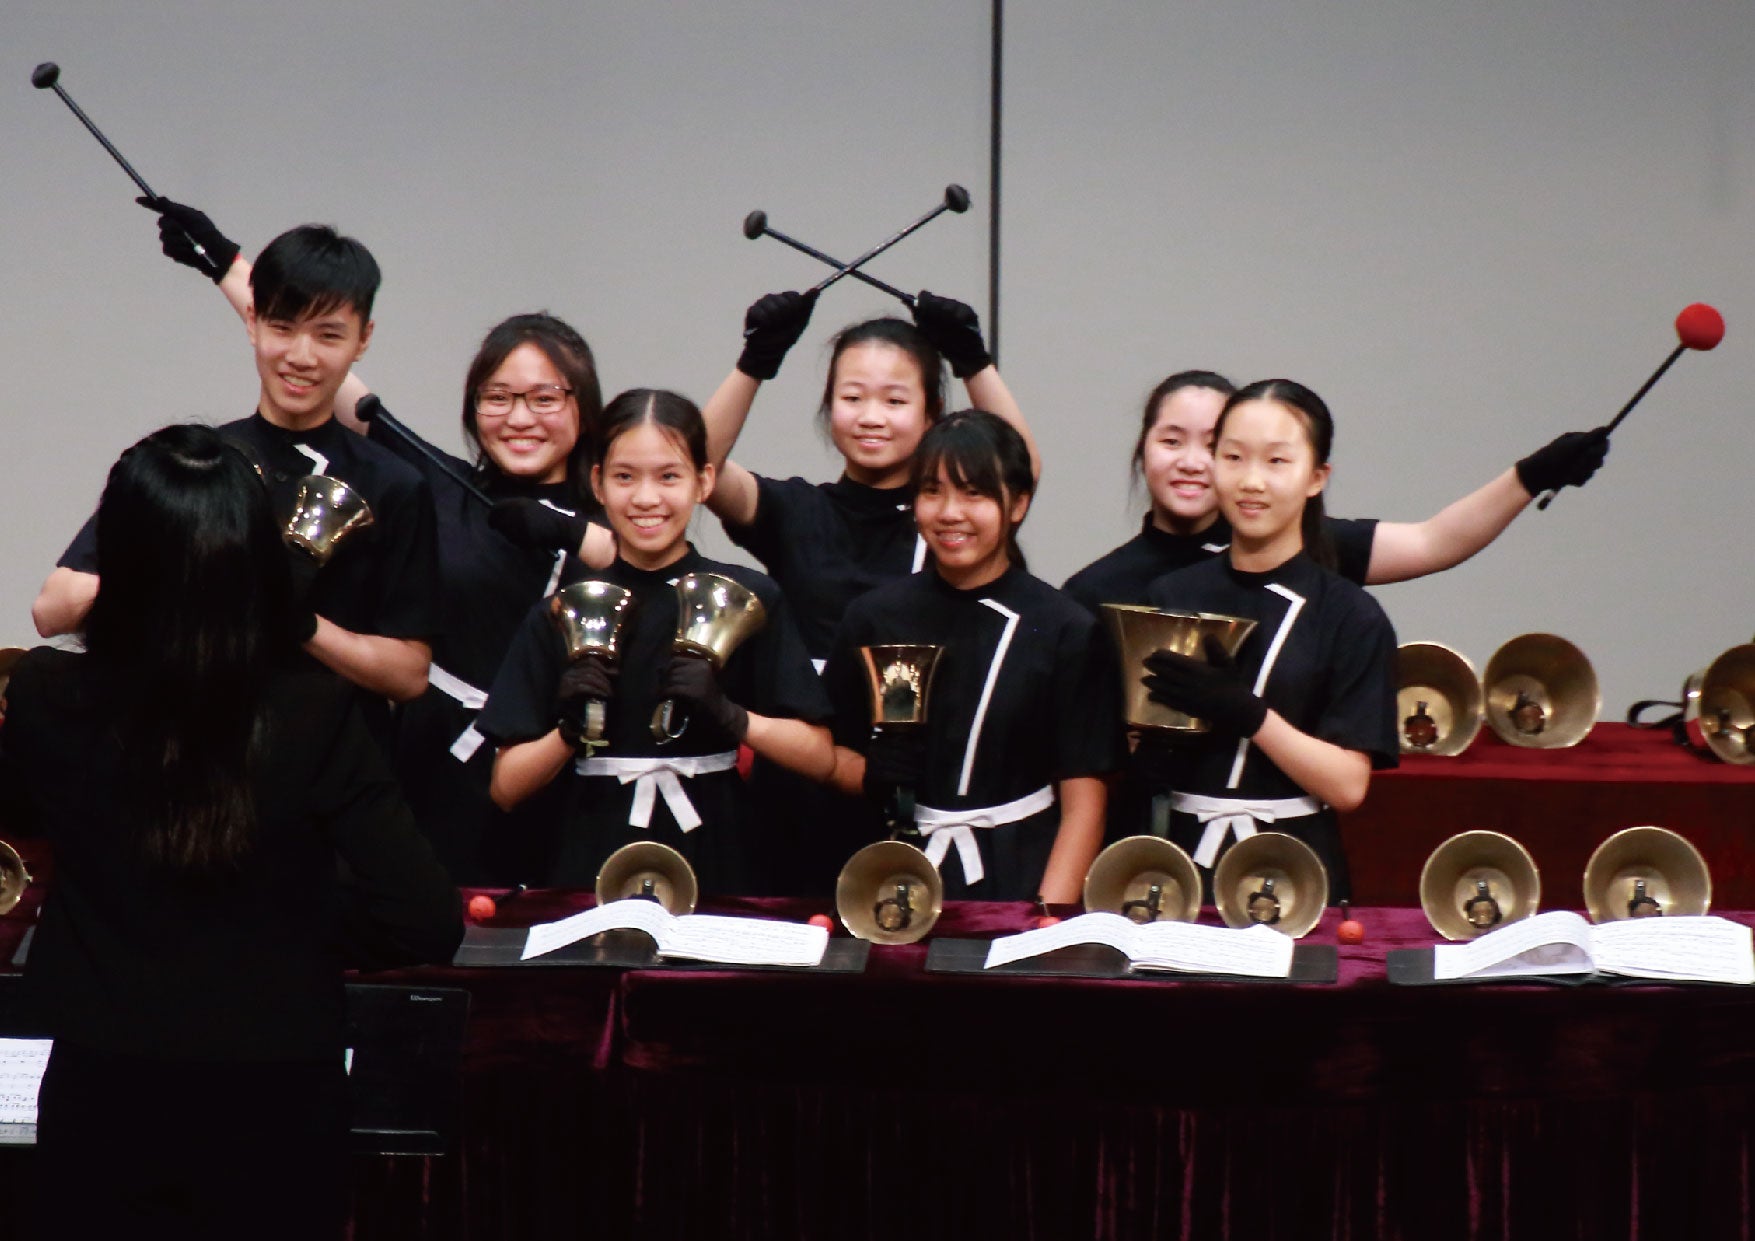 Introduction - What is Handbell Music?